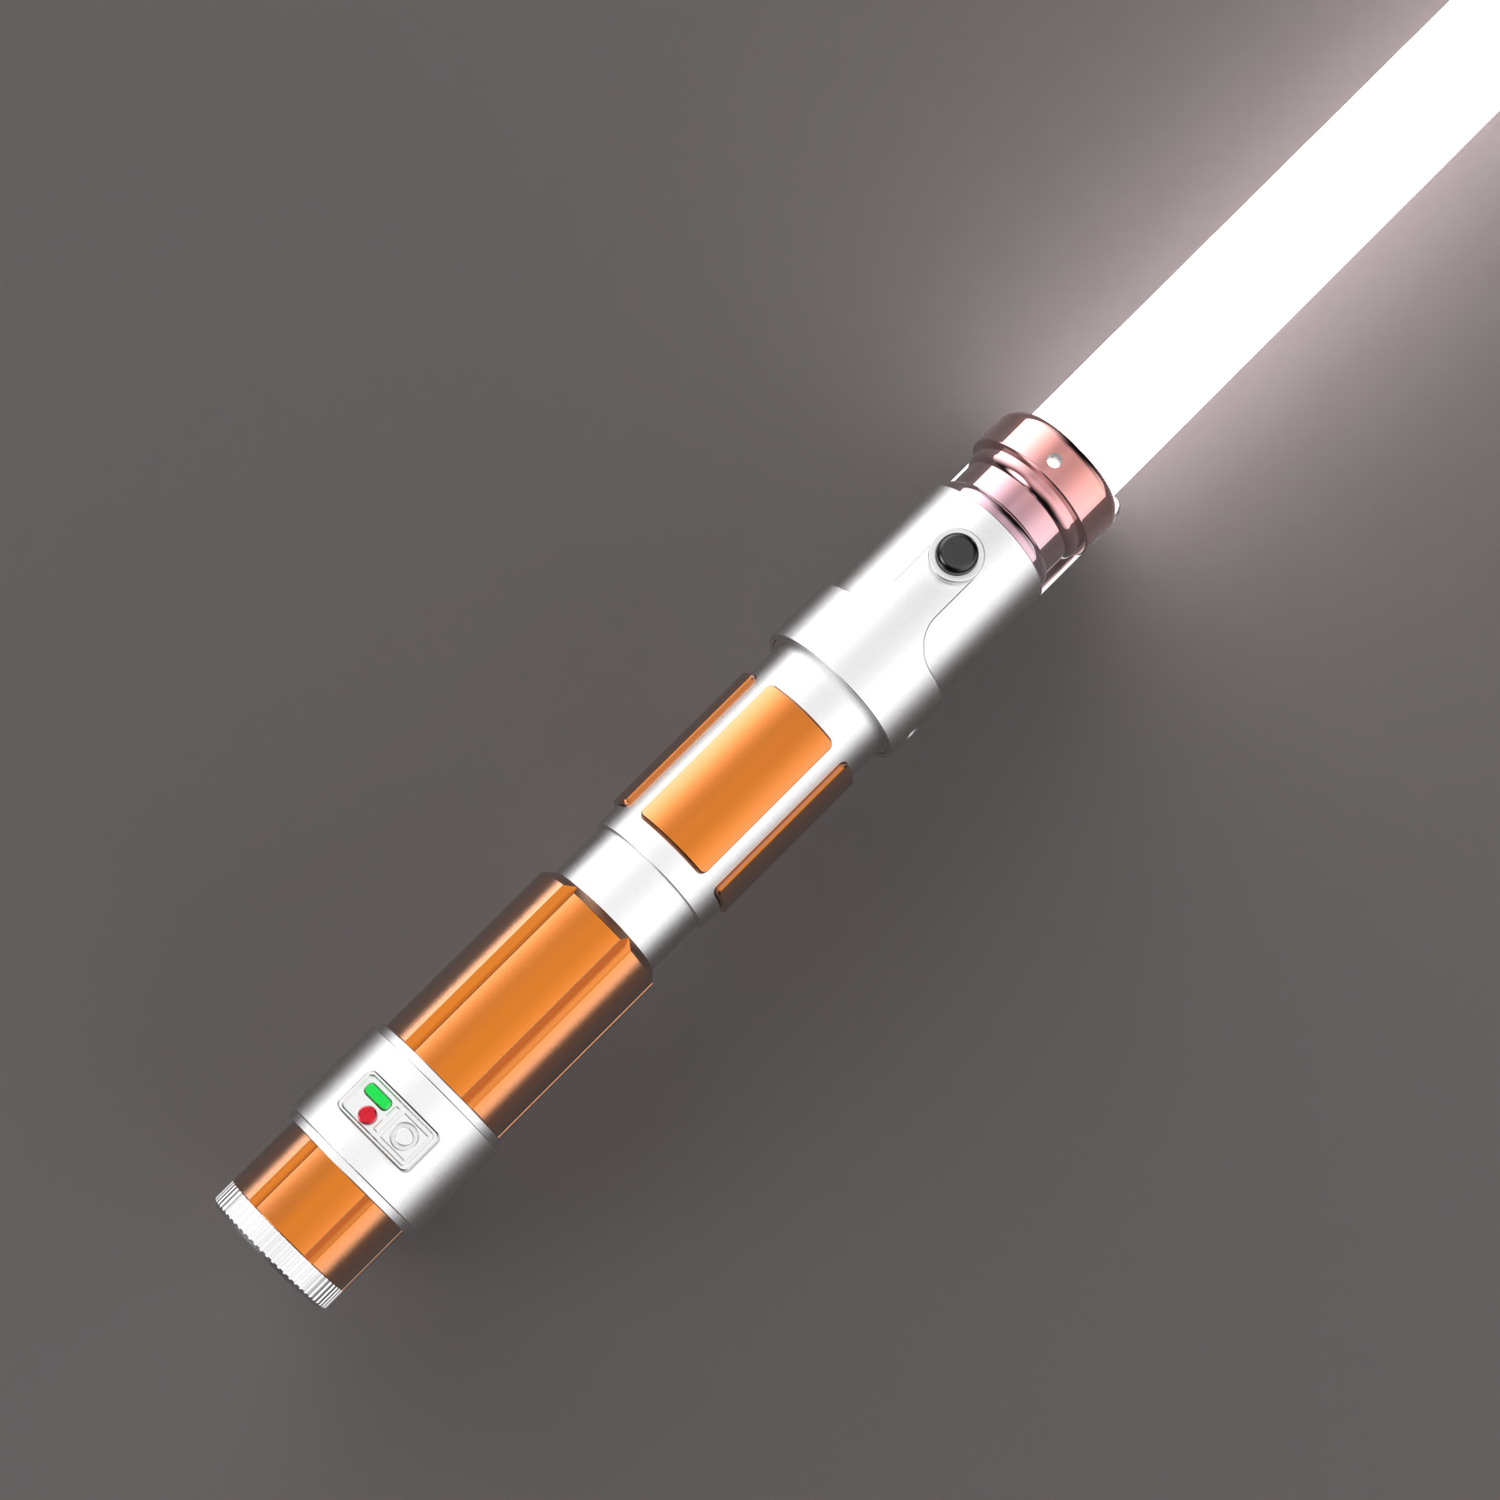 Master Indara lightsaber from The Acolyte